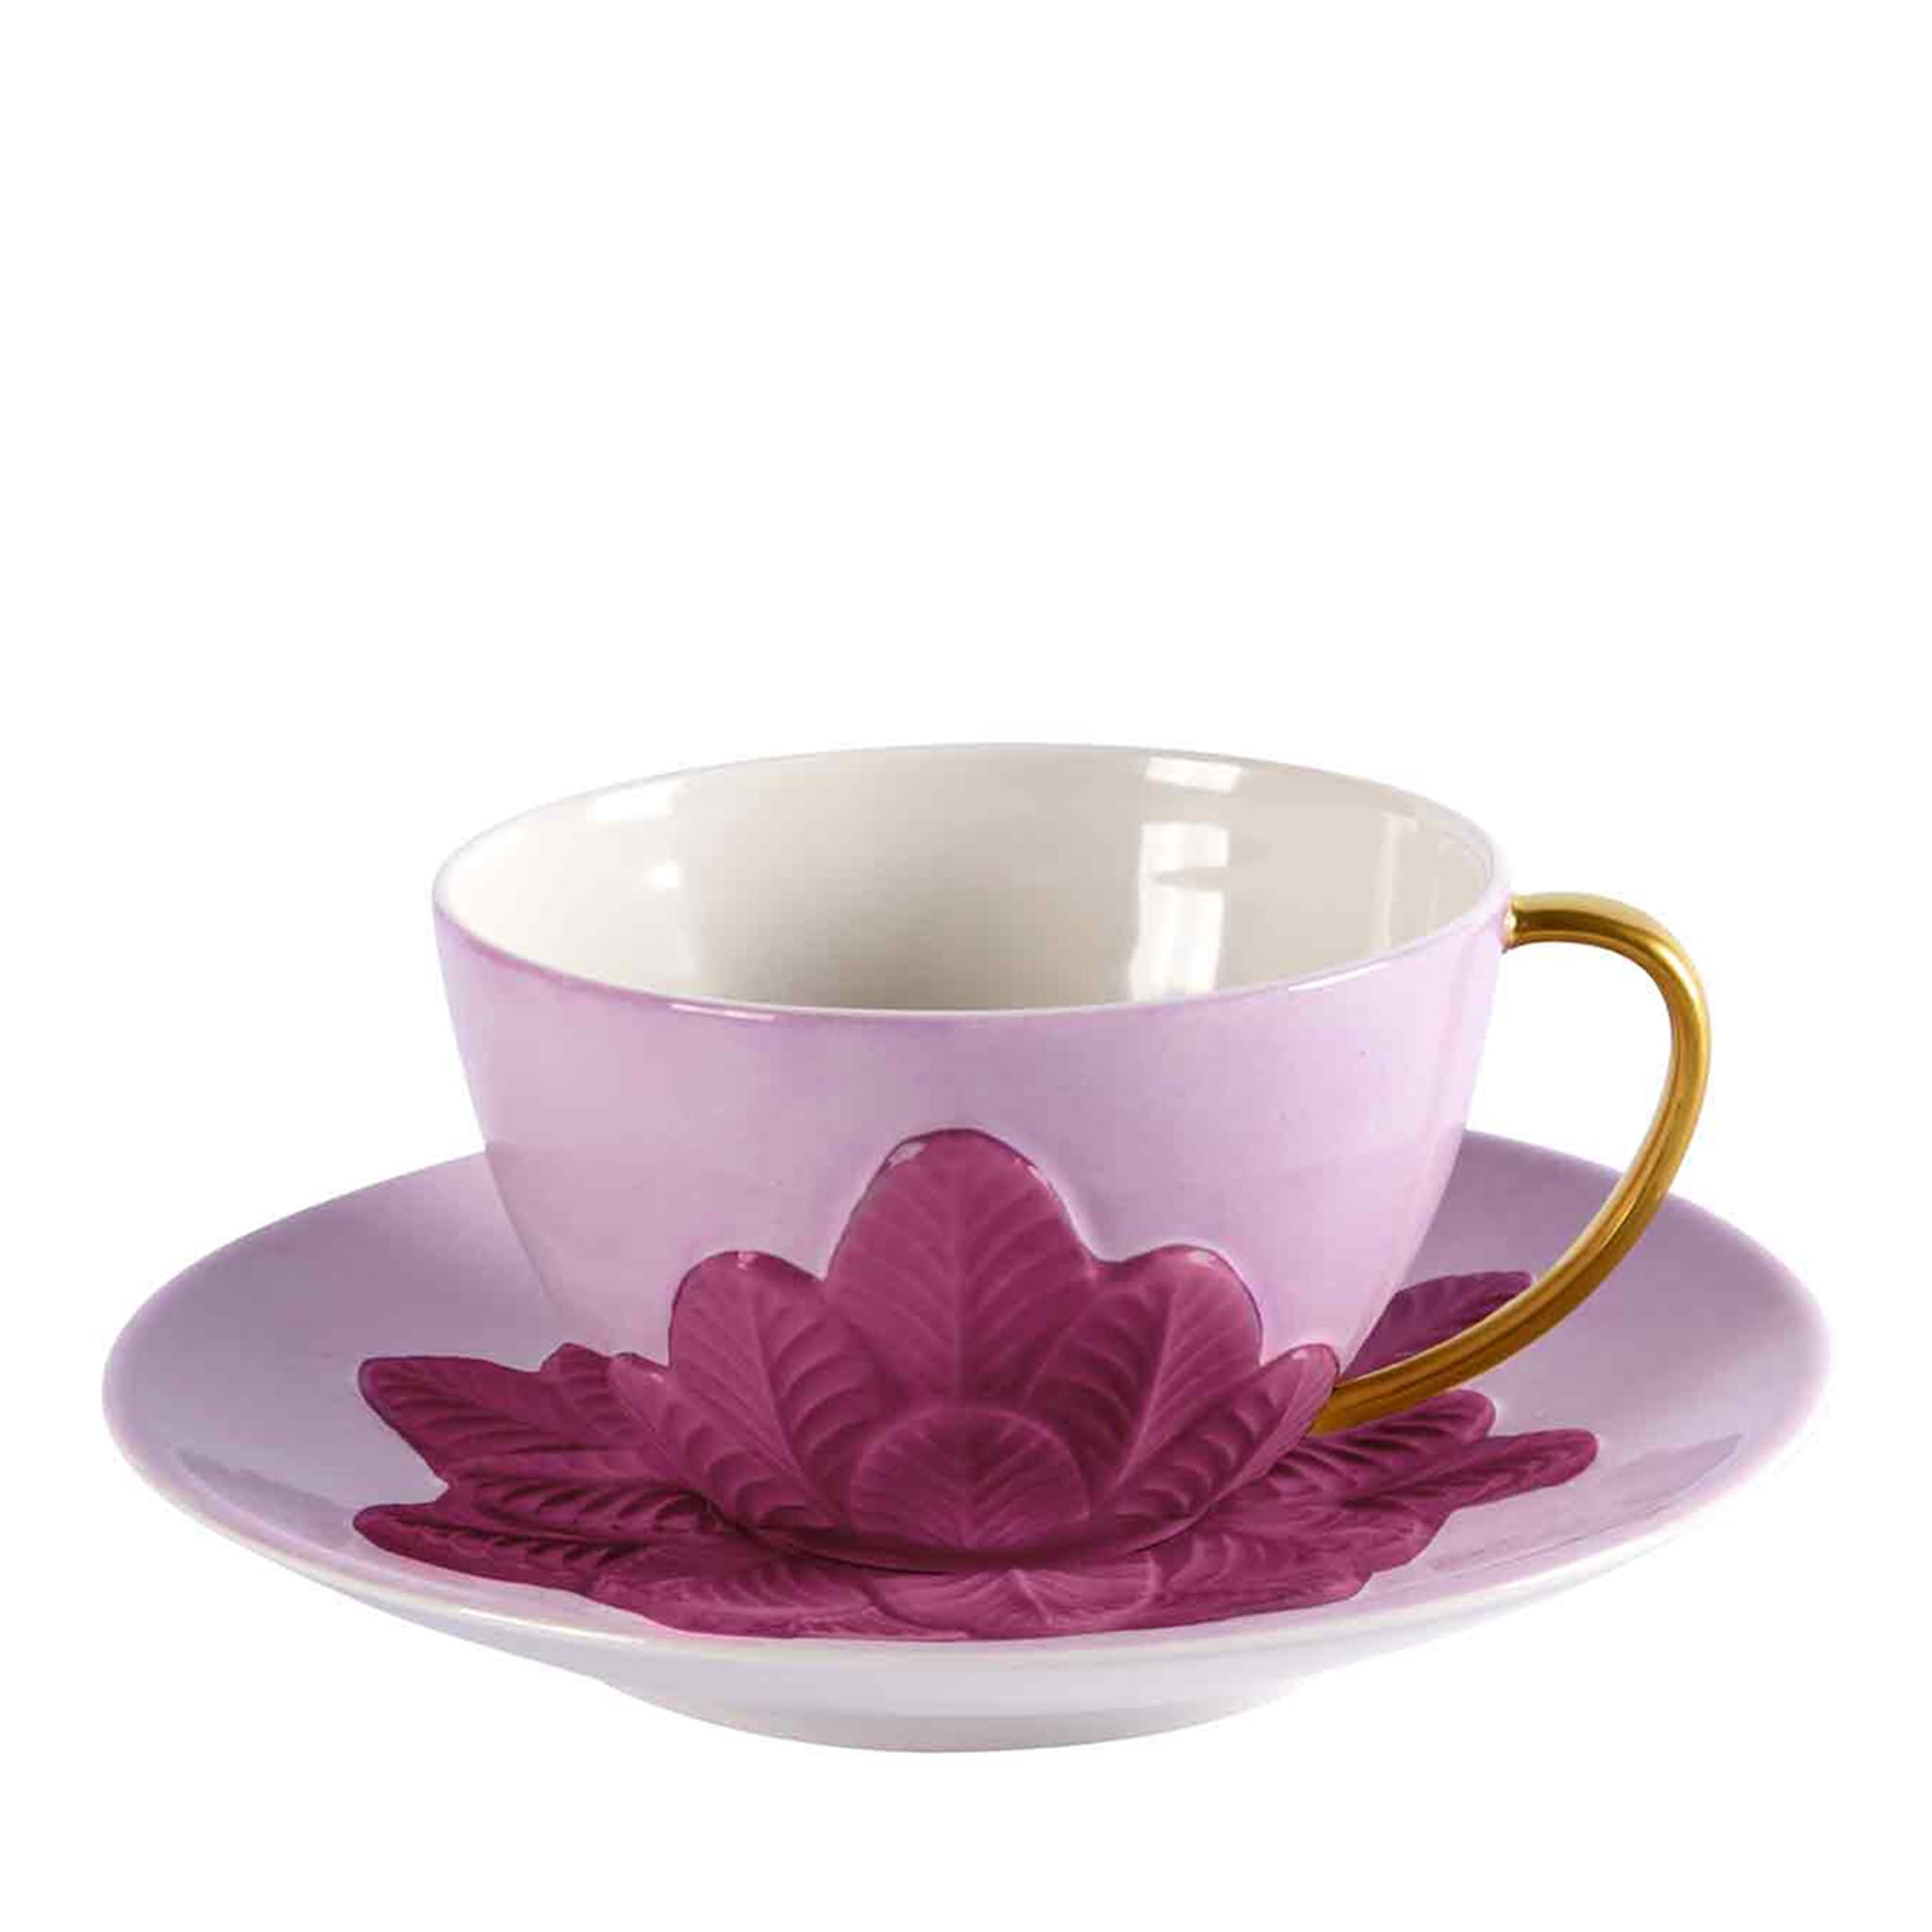 PEACOCK TEA CUP - PURPLE AND GOLD - Main view